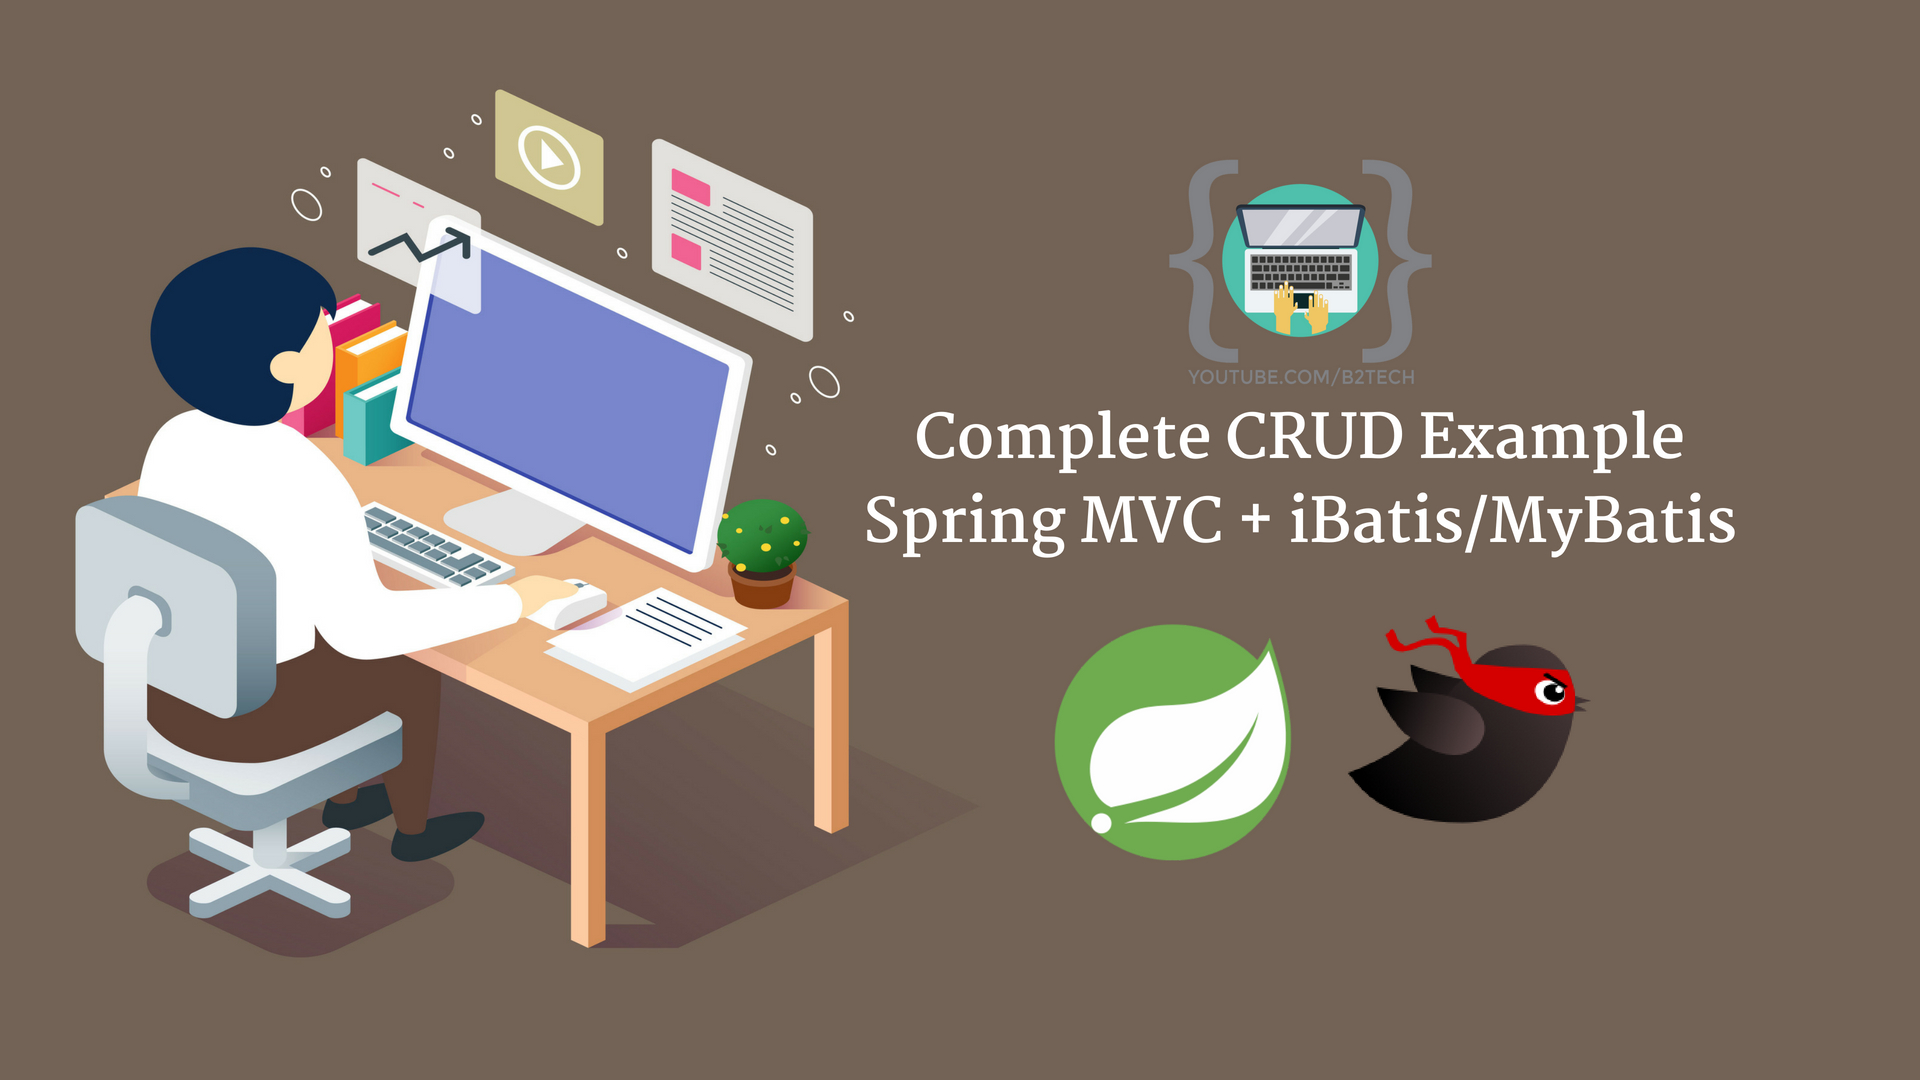 You are currently viewing A Complete CRUD Application with Spring MVC and MyBatis/iBatis